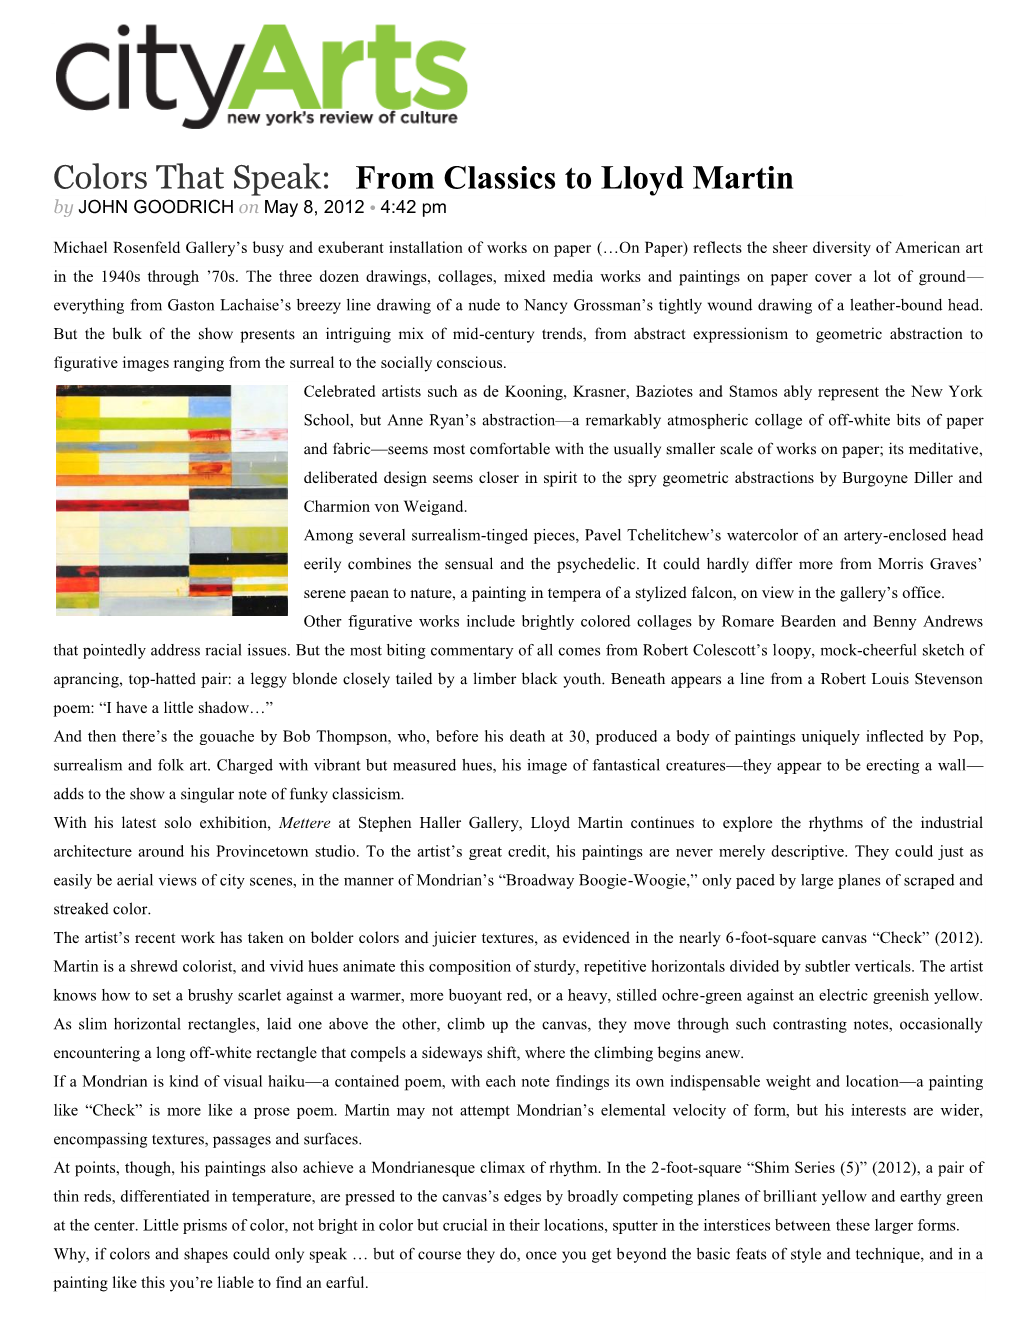 From Classics to Lloyd Martin by JOHN GOODRICH on May 8, 2012 • 4:42 Pm